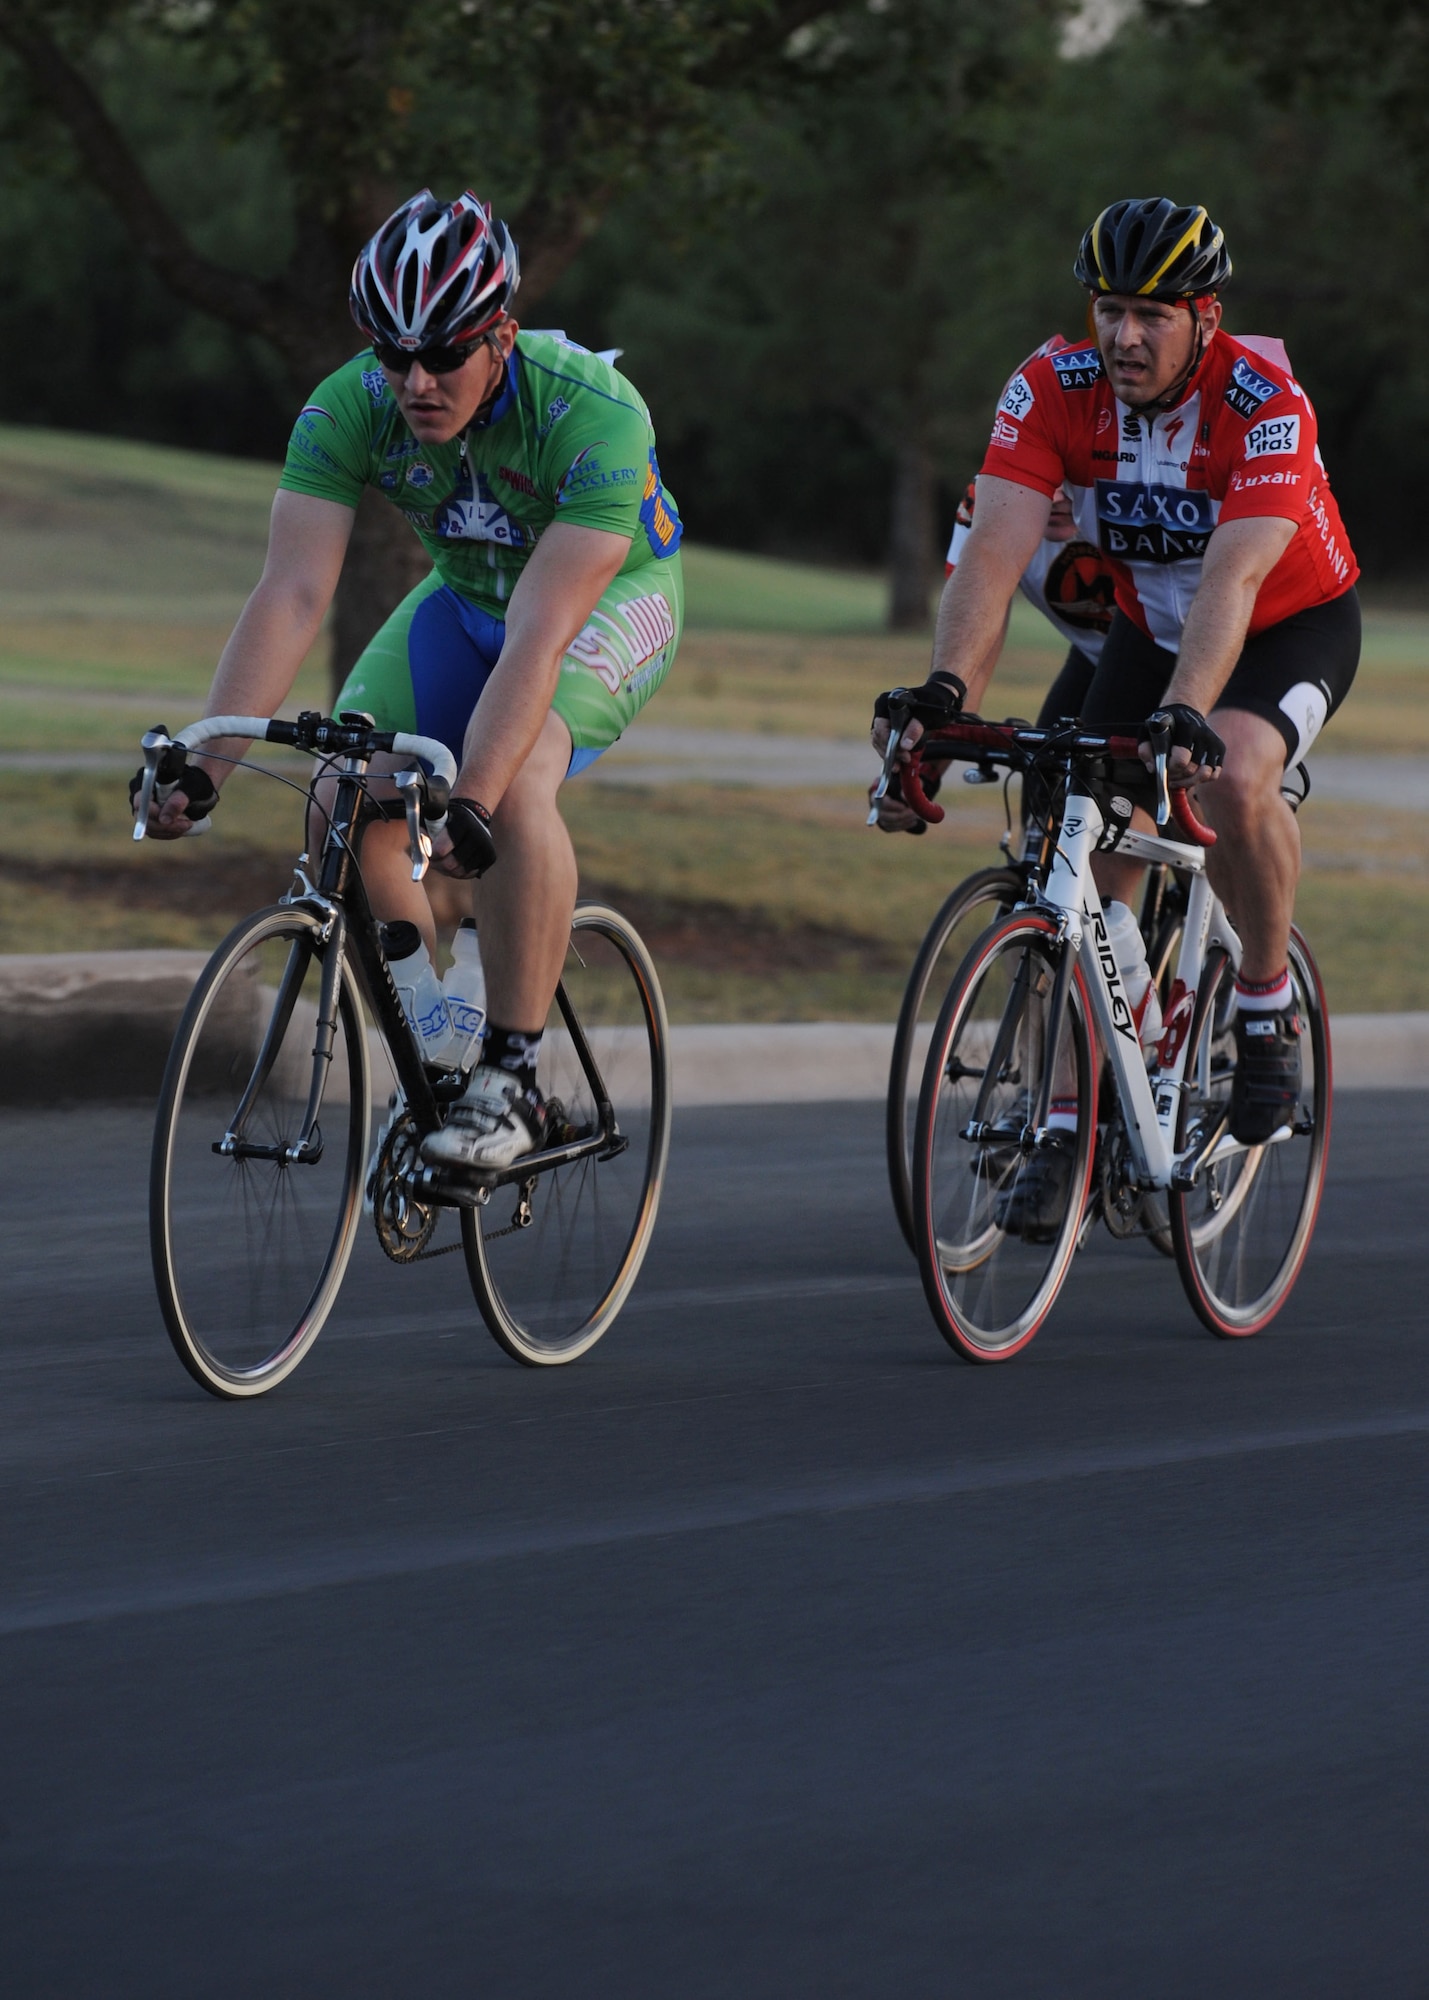 Dyess Air Force Base, Texas- Senior Airman Nick Erhard, 7th Force Support Squadron, keeps a steady lead with Major Graham Little, 7th Maintenance Operations Squadron commander, following close behind July 16, 2011. More than 50 cyclists of all abilities challenged themselves during the competitive event on a 26 mile course starting at the fitness center, trekking around the base. (U.S. Air Force photo by Airman 1st Class Jonathan Stefanko/Released) 